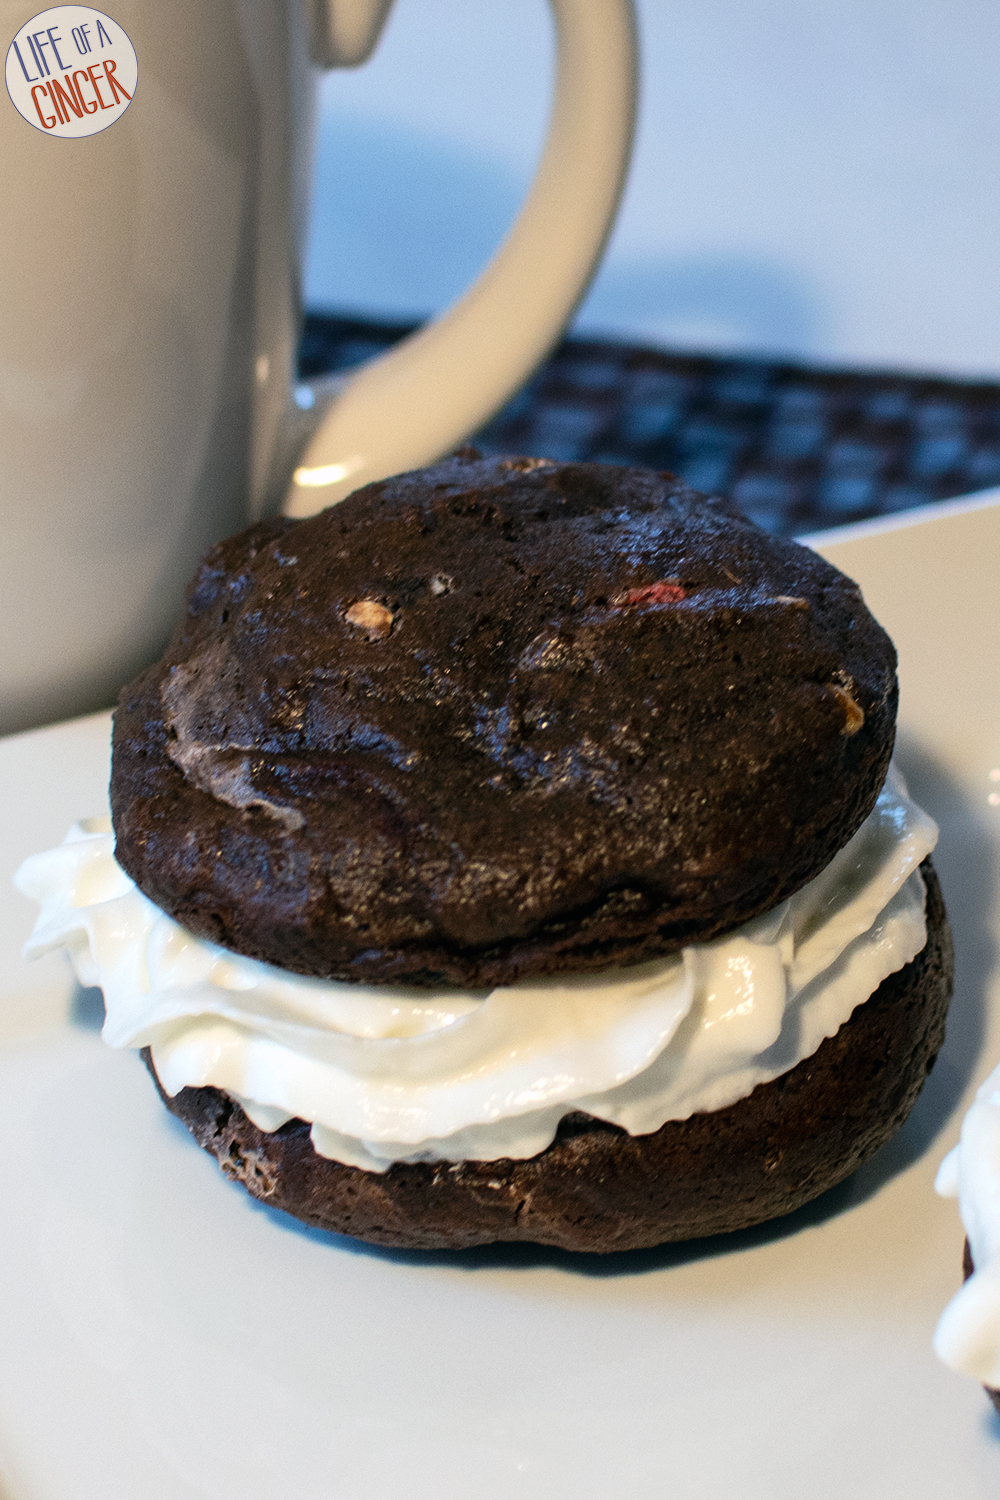 Peppermint Hot Chocolate Whoopie Pies